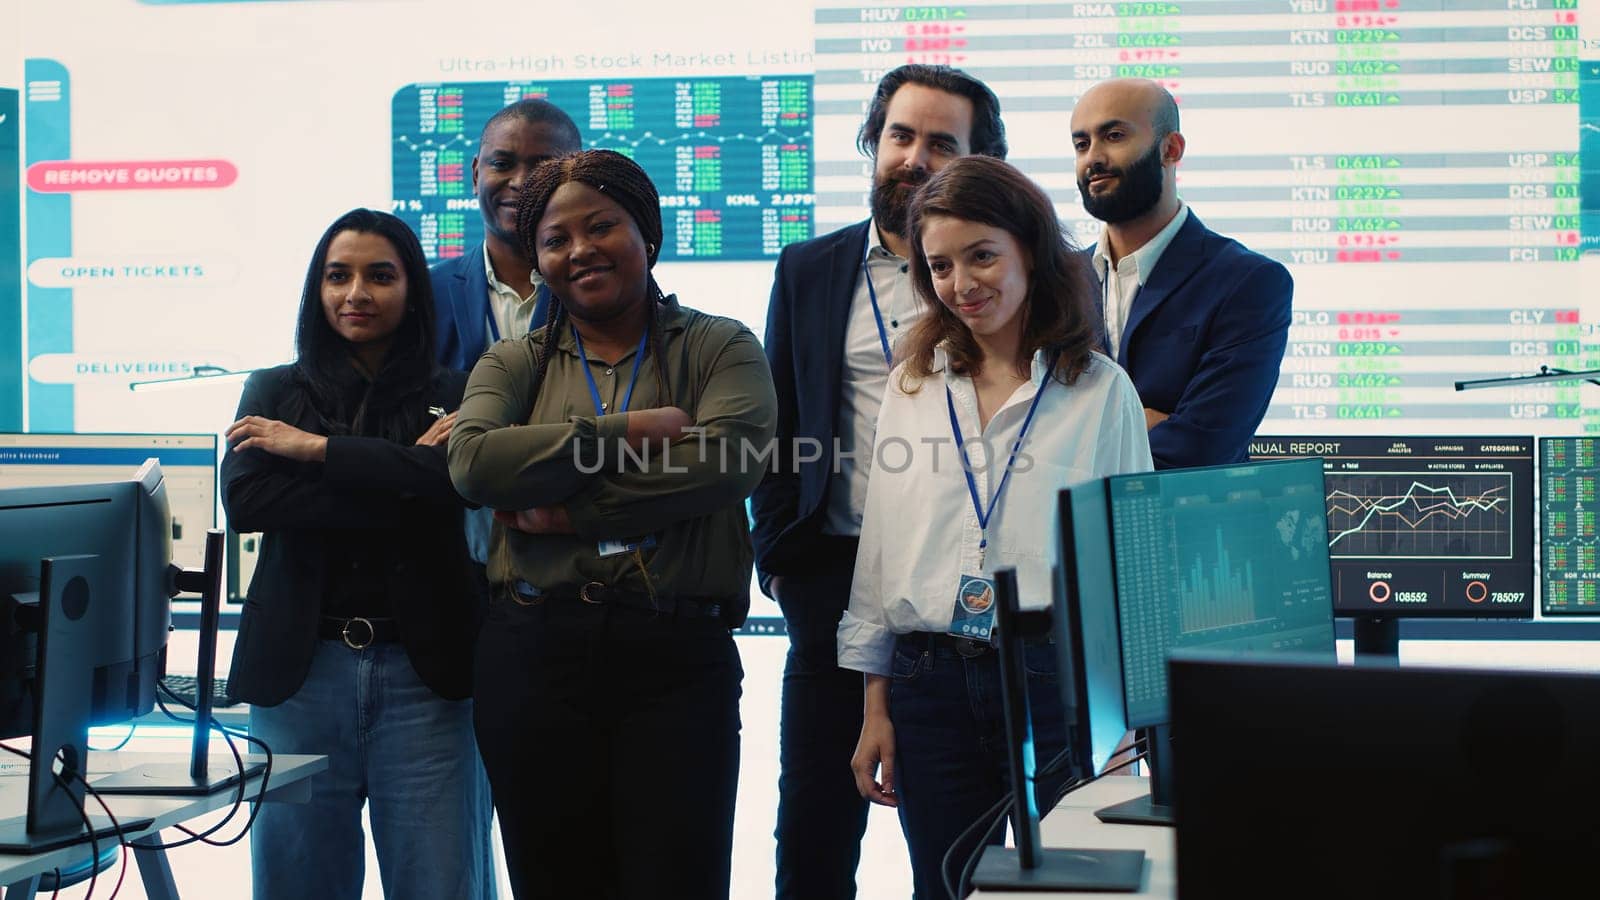 Professional forecast affiliates group posing in monitoring room, making crucial decisions together to ensure objectives accomplishment and work on international business expansion. Camera A.